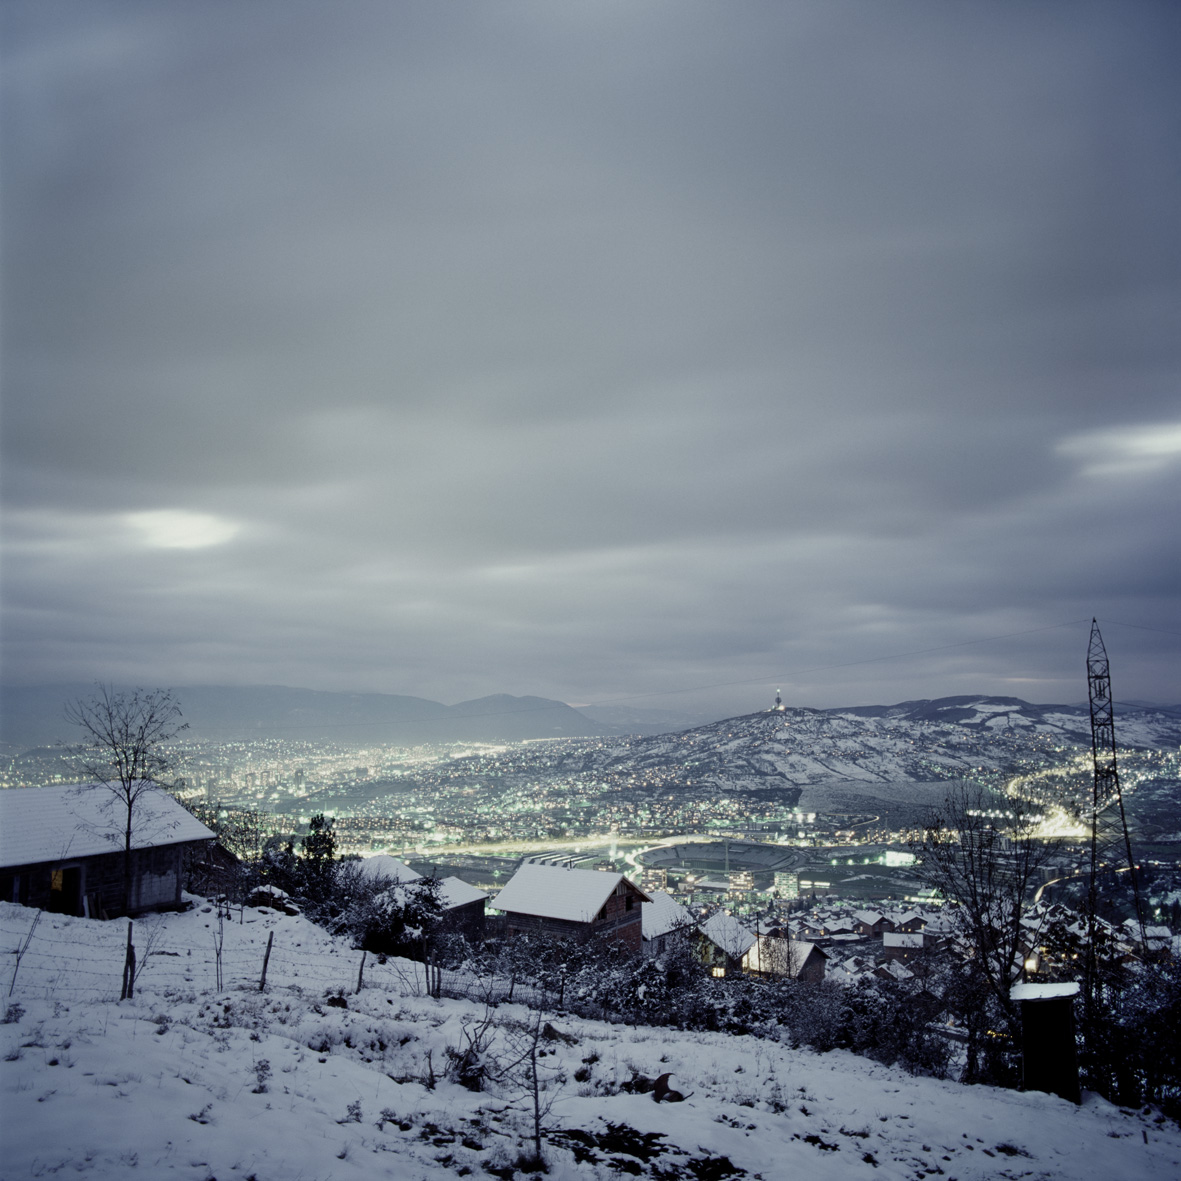 Peter Hebeisen, The Siege of Sarajevo, Bosnia, 2000
Pigment print on Archival paper
162 x 162 cm / Edition of  3 + 1 AP
112 x 112 cm / Edition of  5 + 1 AP
